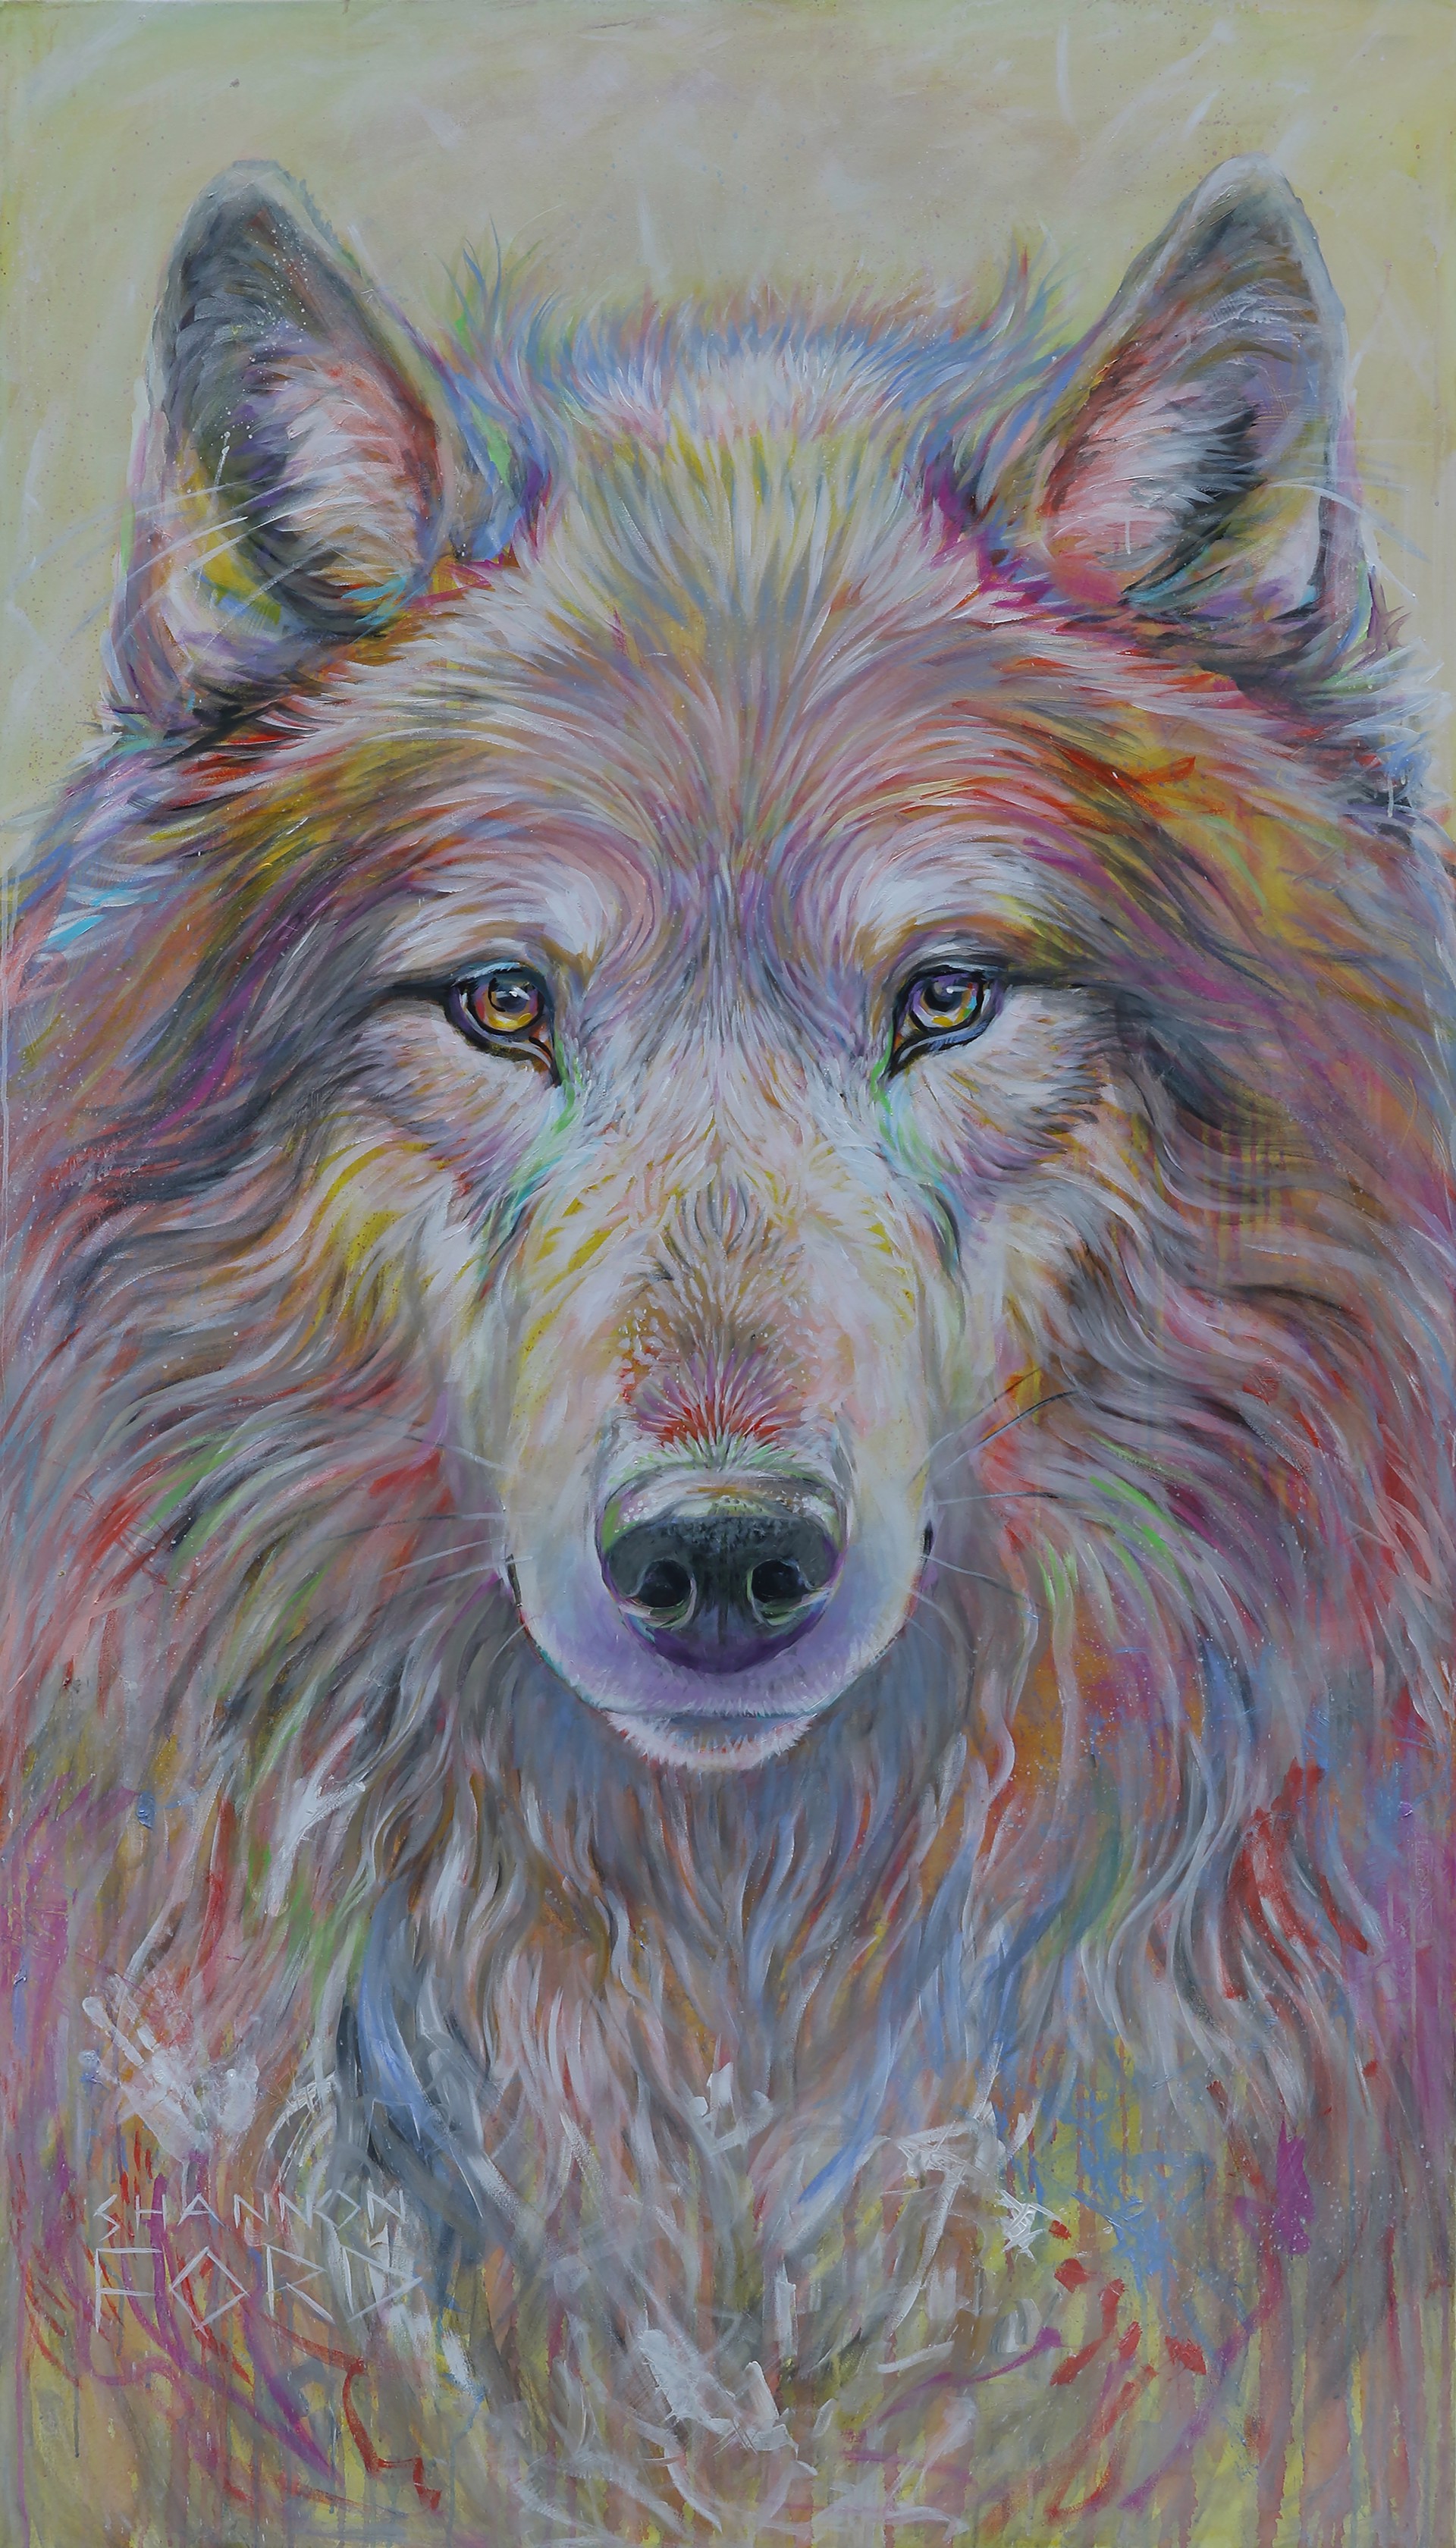 Eyes of the Wilderness by Shannon Ford